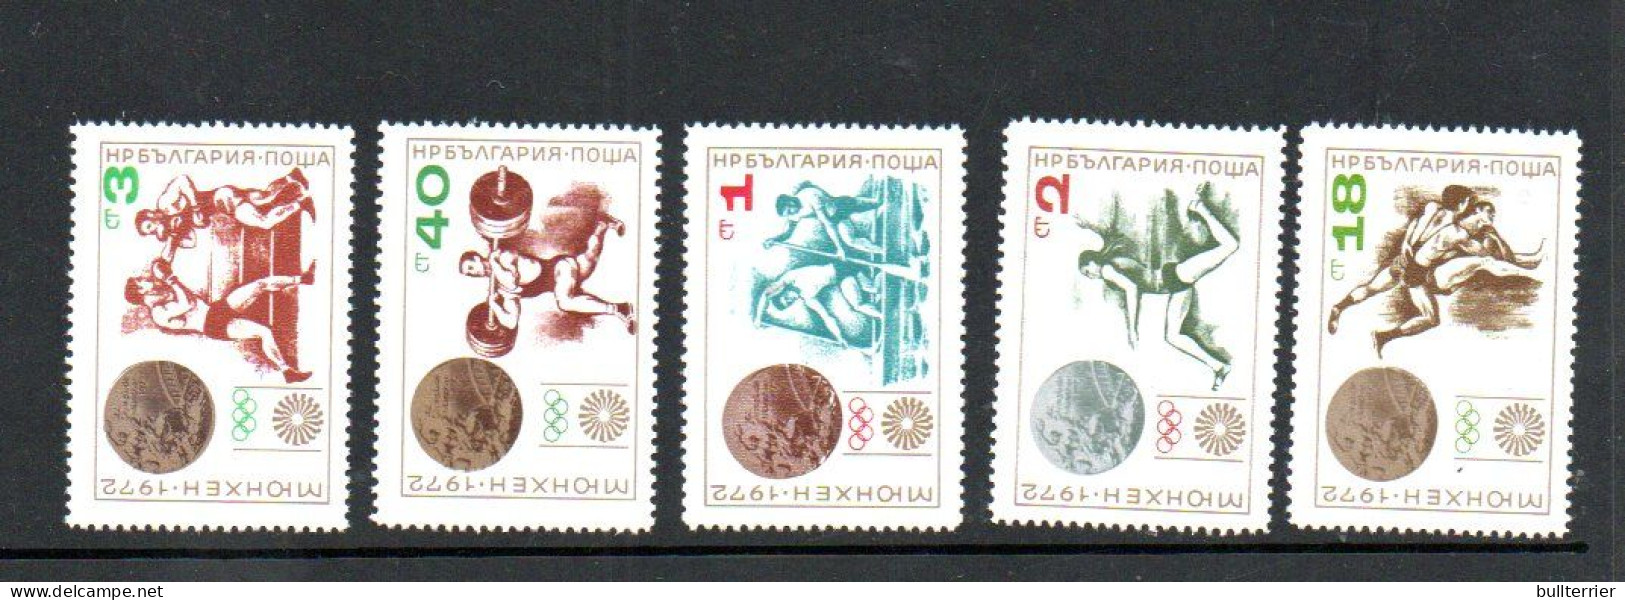 BULGARIA - 1973 - MUNICH MEDAL WINNERS SET OF 5  MINT NEVER HINGED - Unused Stamps